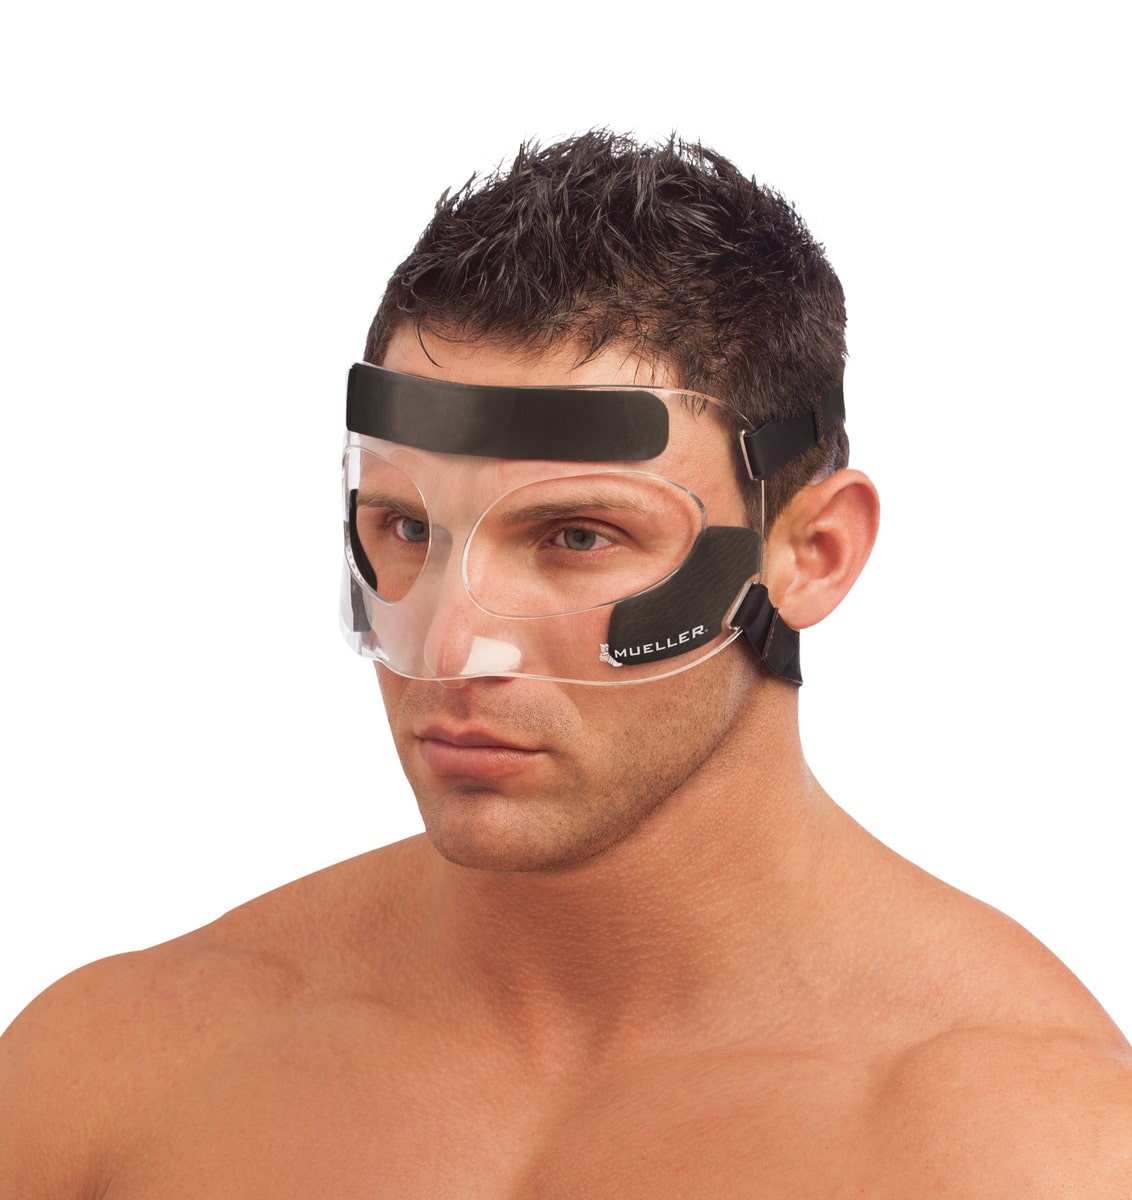 Nose Guard For Broken Nose, Adjustable Face Shield Mask For Sports Soccer  Basketball, Protect Your Face And Nose From Impact